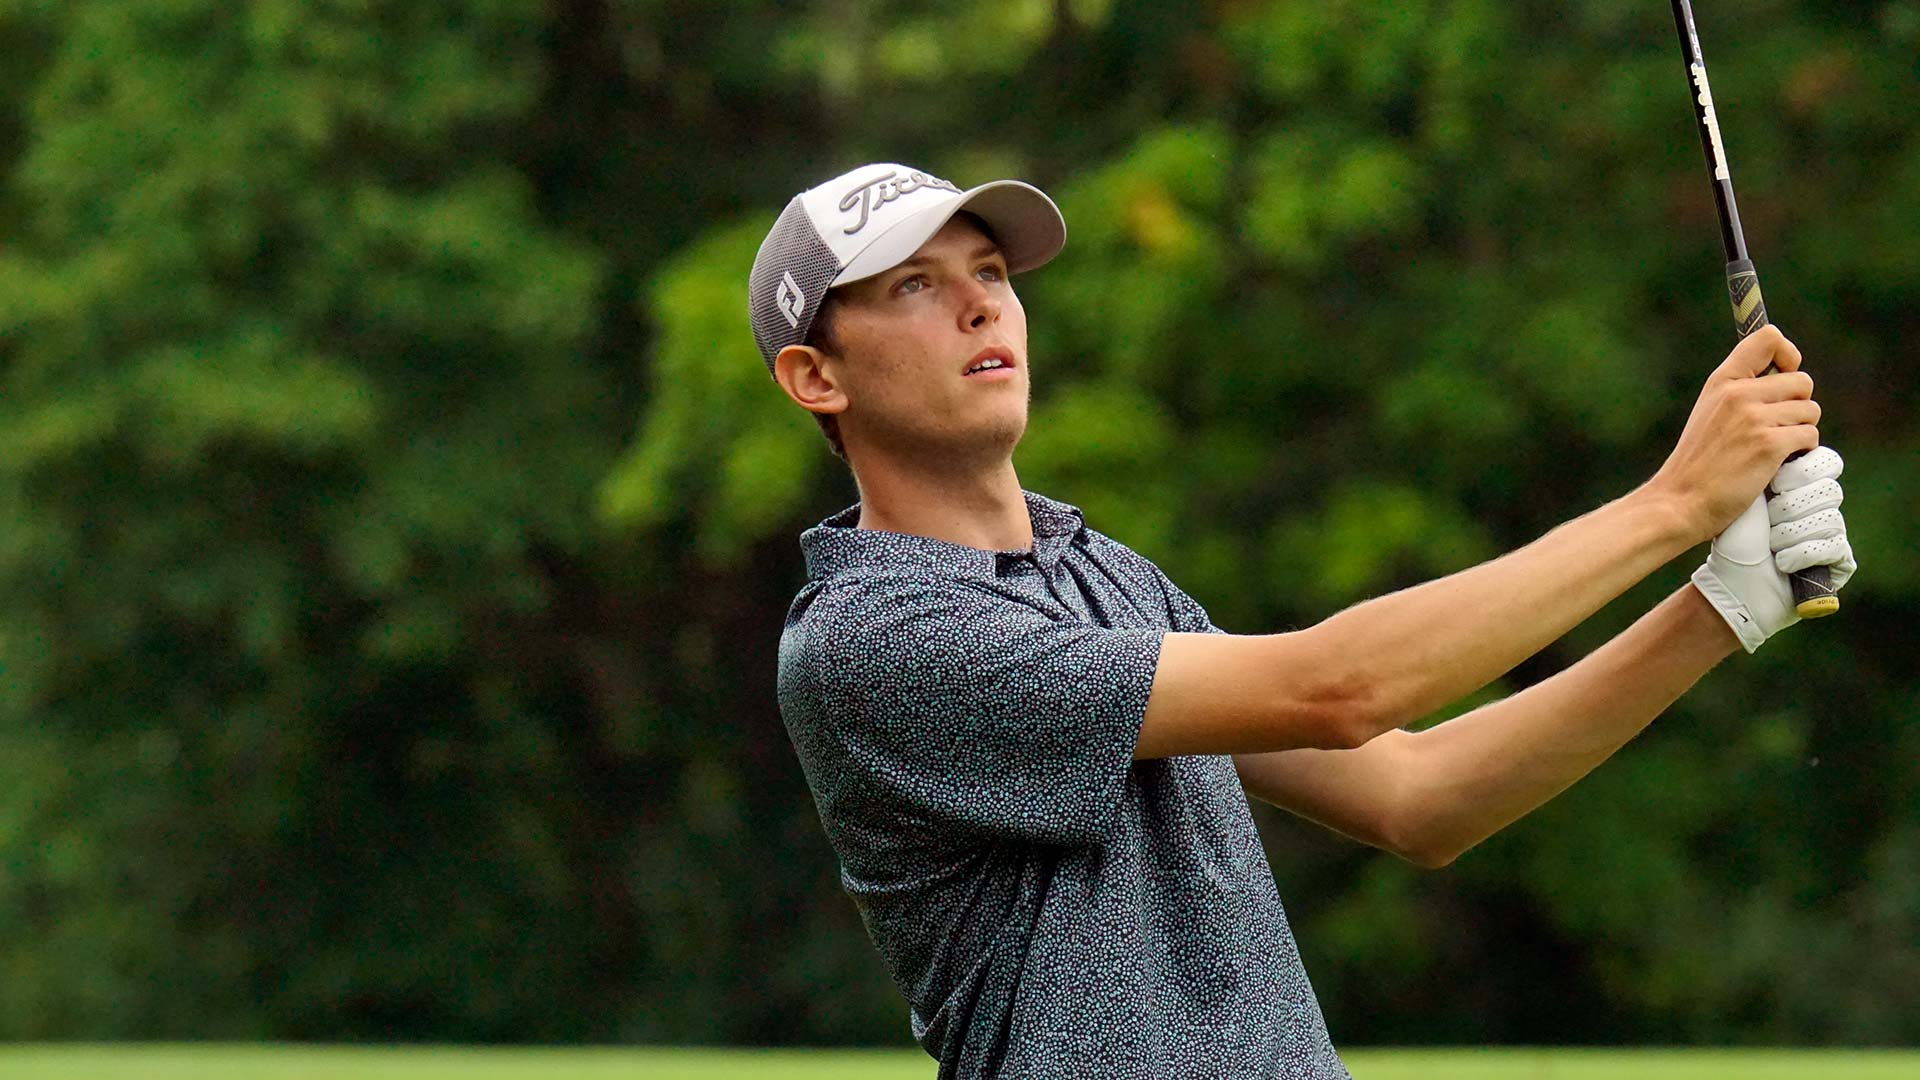 Mentor’s-Antonio-Bodziony-a-member-of-the-Lake-Erie-College-golf-team-finished-with-a-flair-at-Sleepy-Hollow-to-earn-a-blowout-win-at-the-2022-Greater-Cleveland-Amateur-Championship.jpg